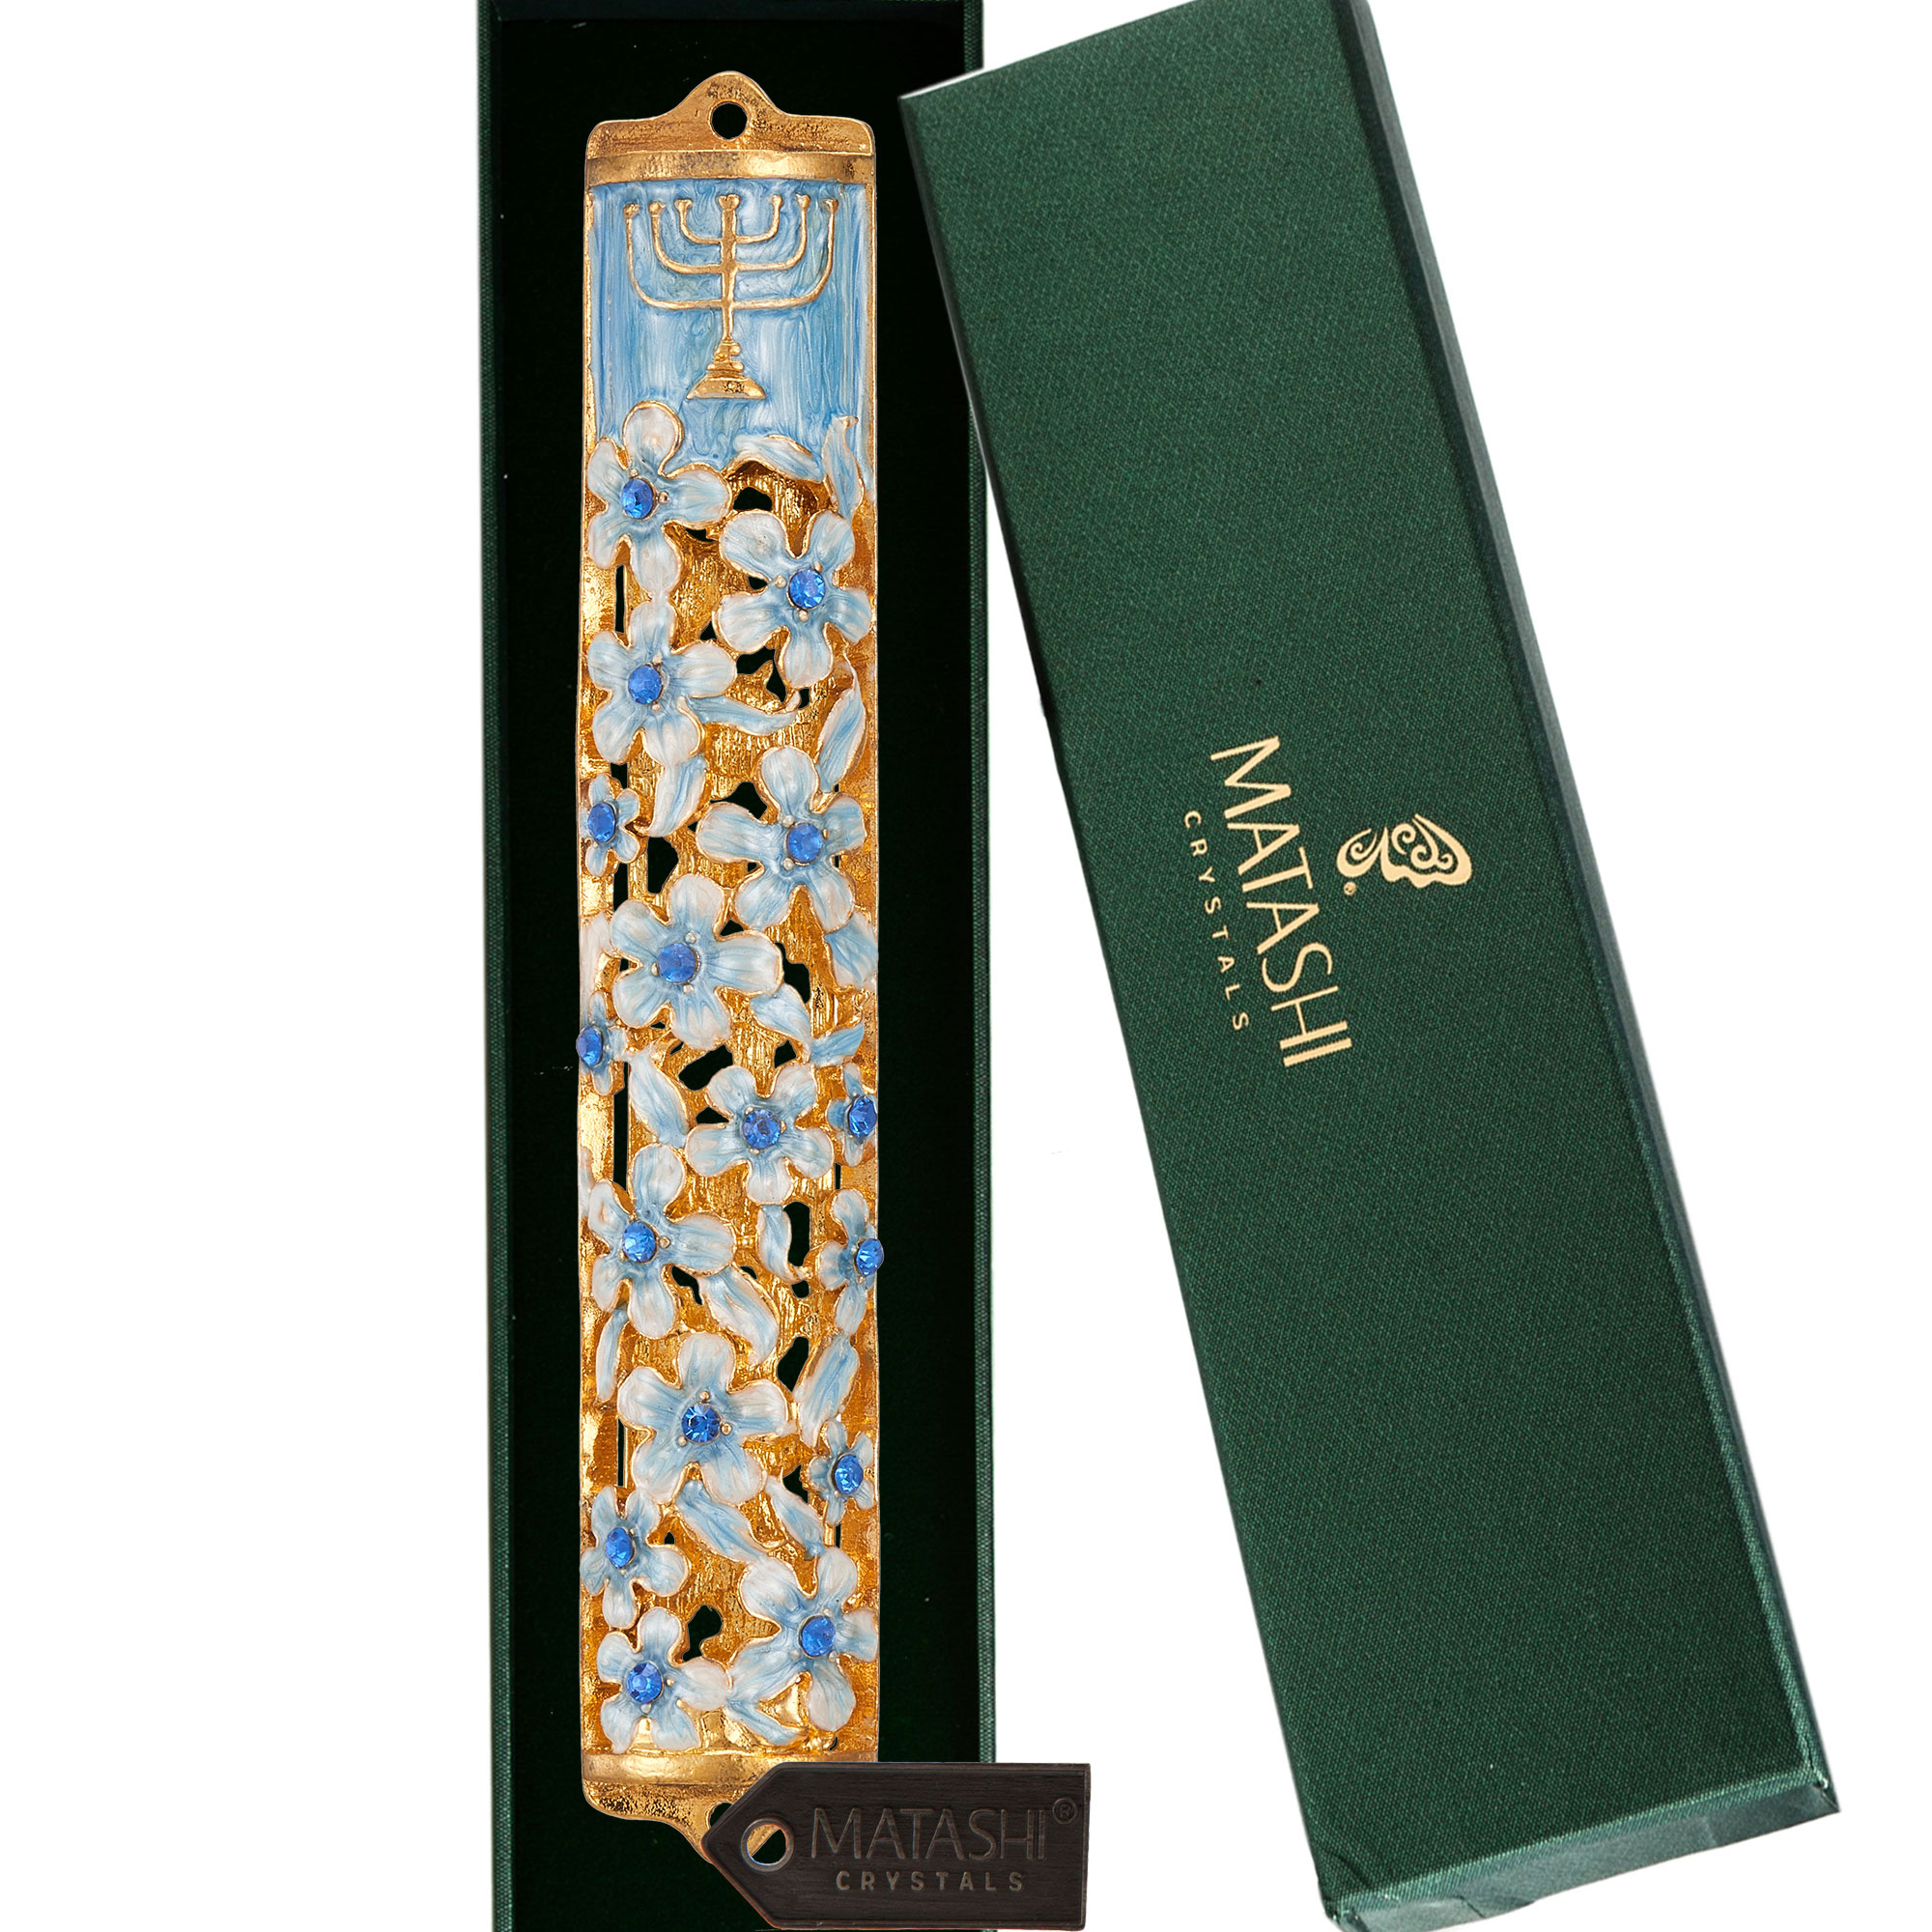 Matashi Hand Painted 5.5 Blue And Ivory Enamel Flower Mezuzah Embellished W/ Gold Accents,Menorah Design And High Quality Crystals